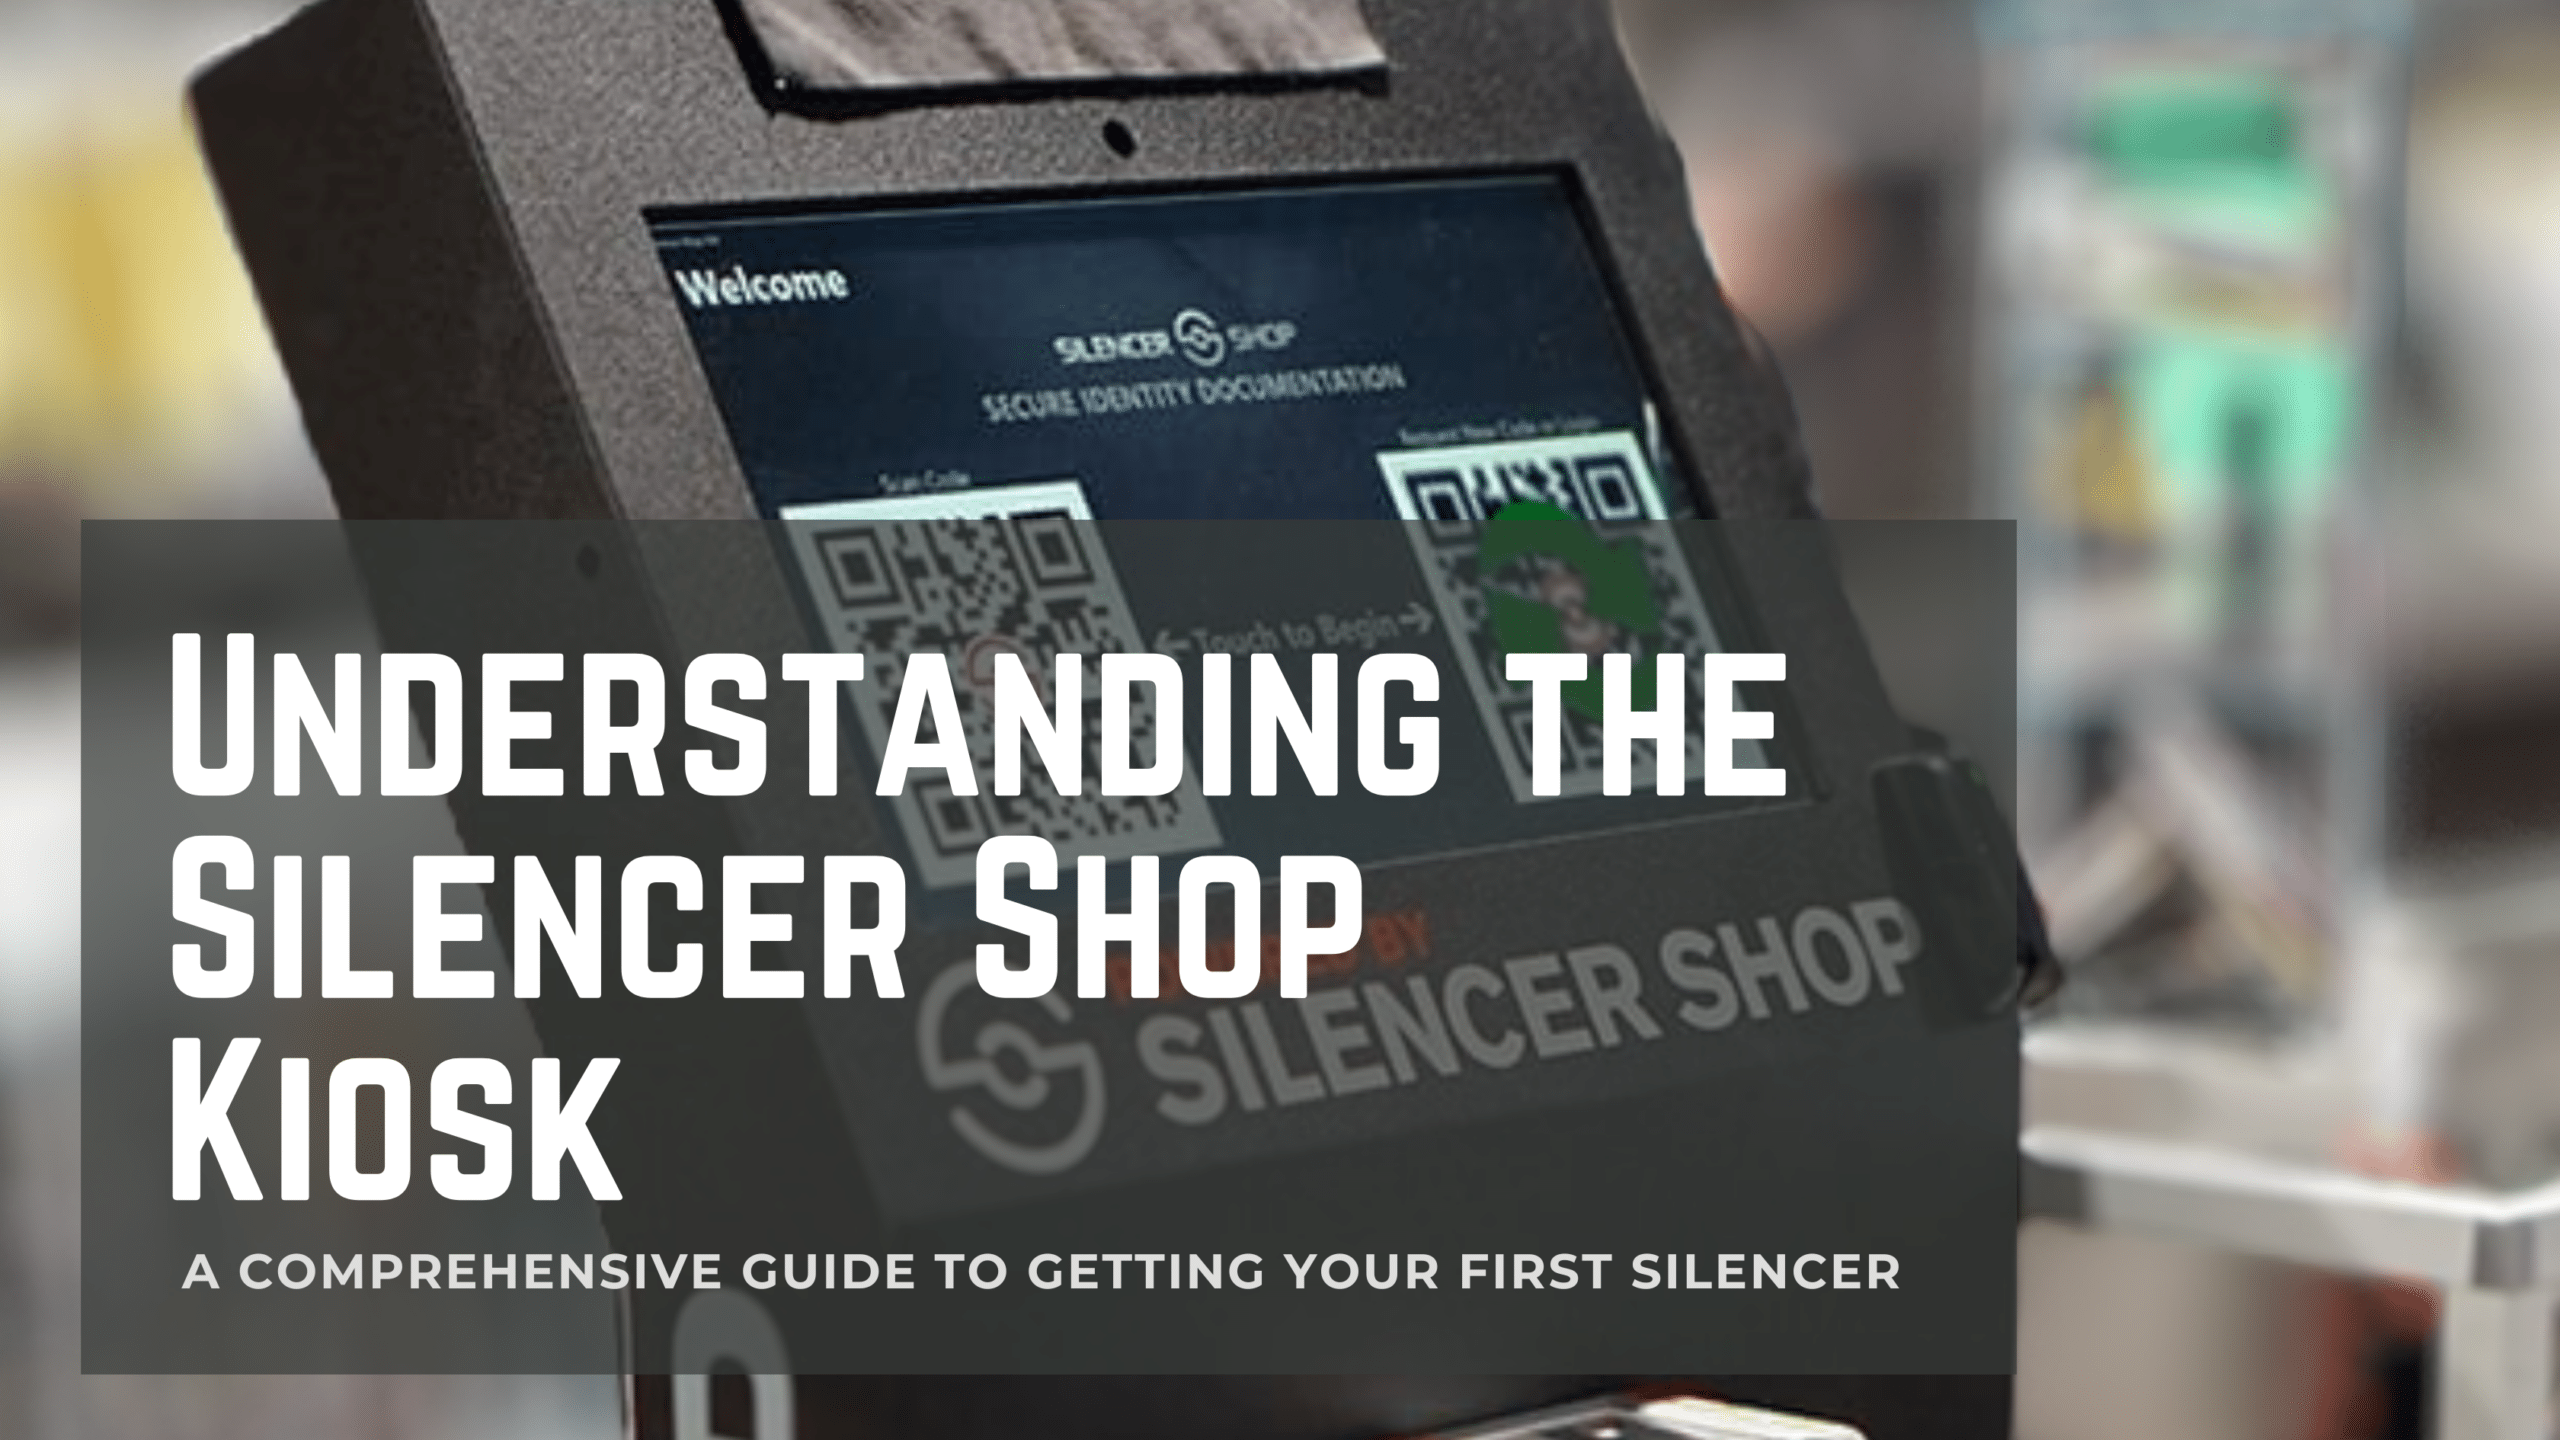 The Silencer Shop Kiosk system simplifies the purchase of National Firearms Act (NFA) items and uses the Silencer Shop app to finalize transactions and monitor the status of your purchases.